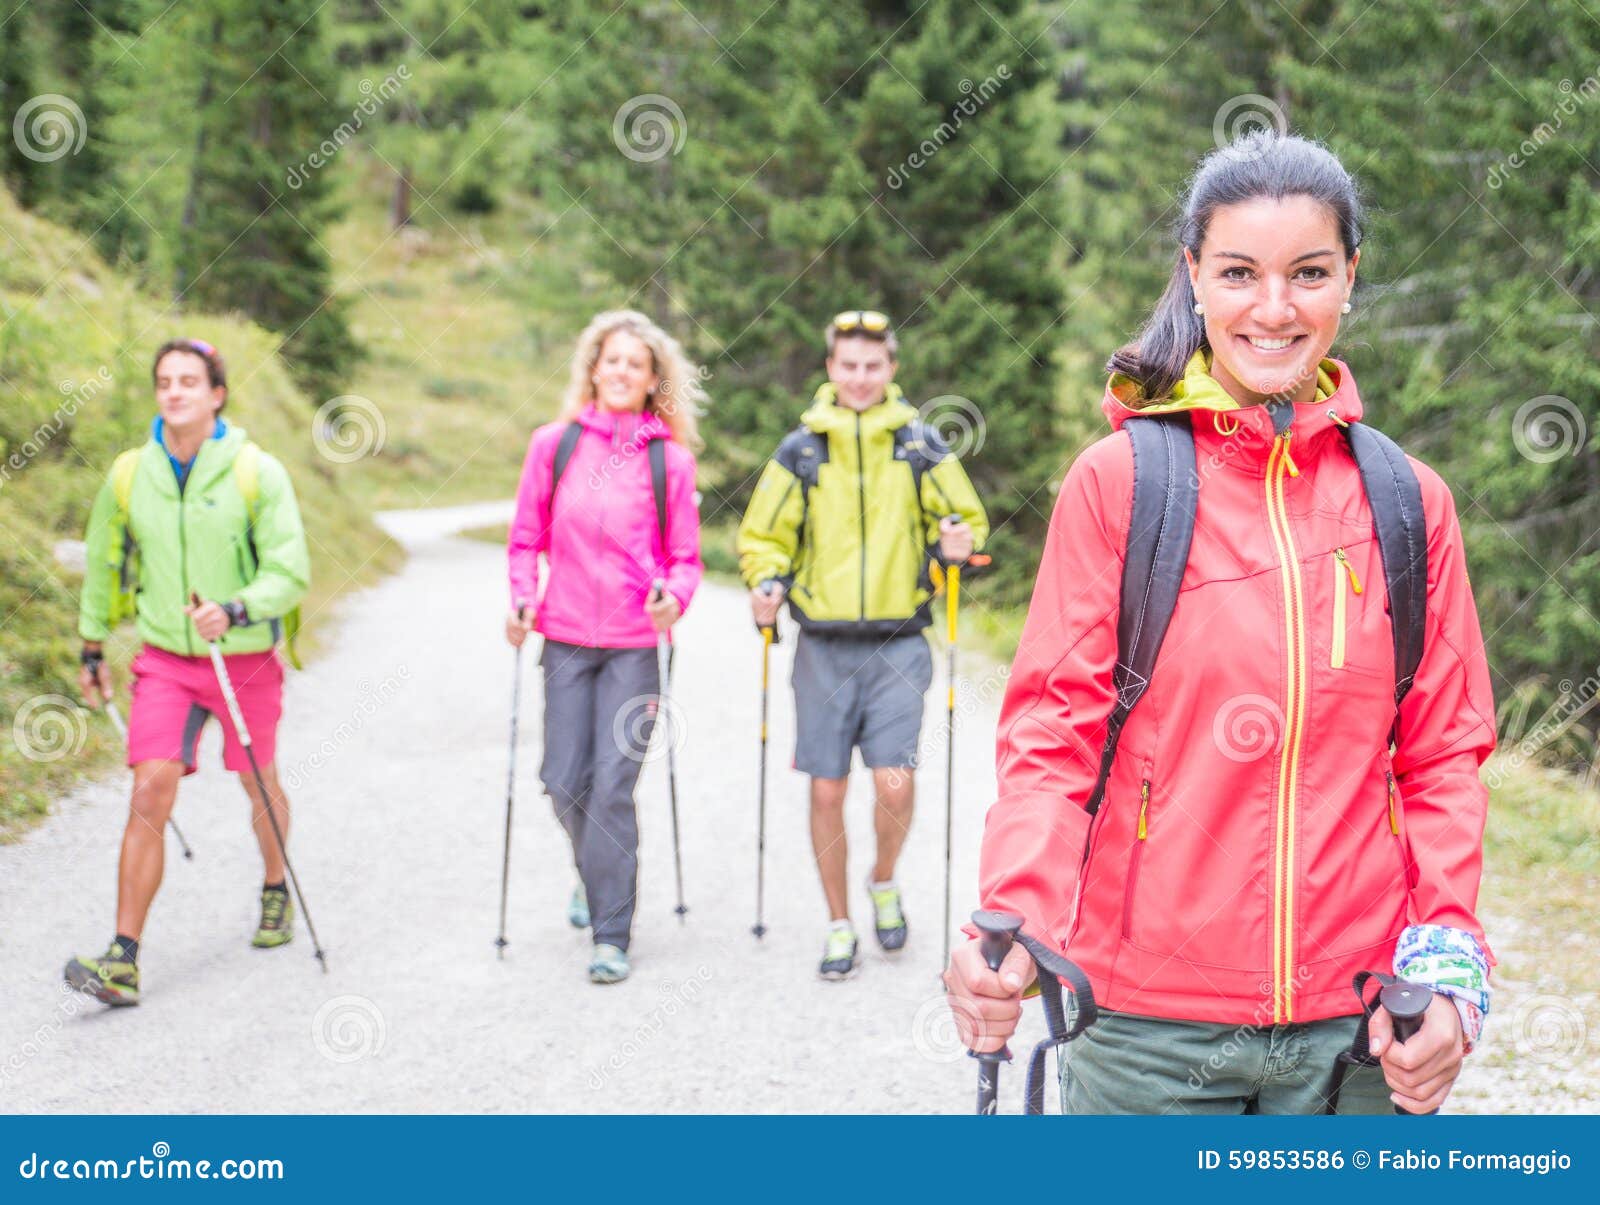 group of friends making trekking excursion in the forest